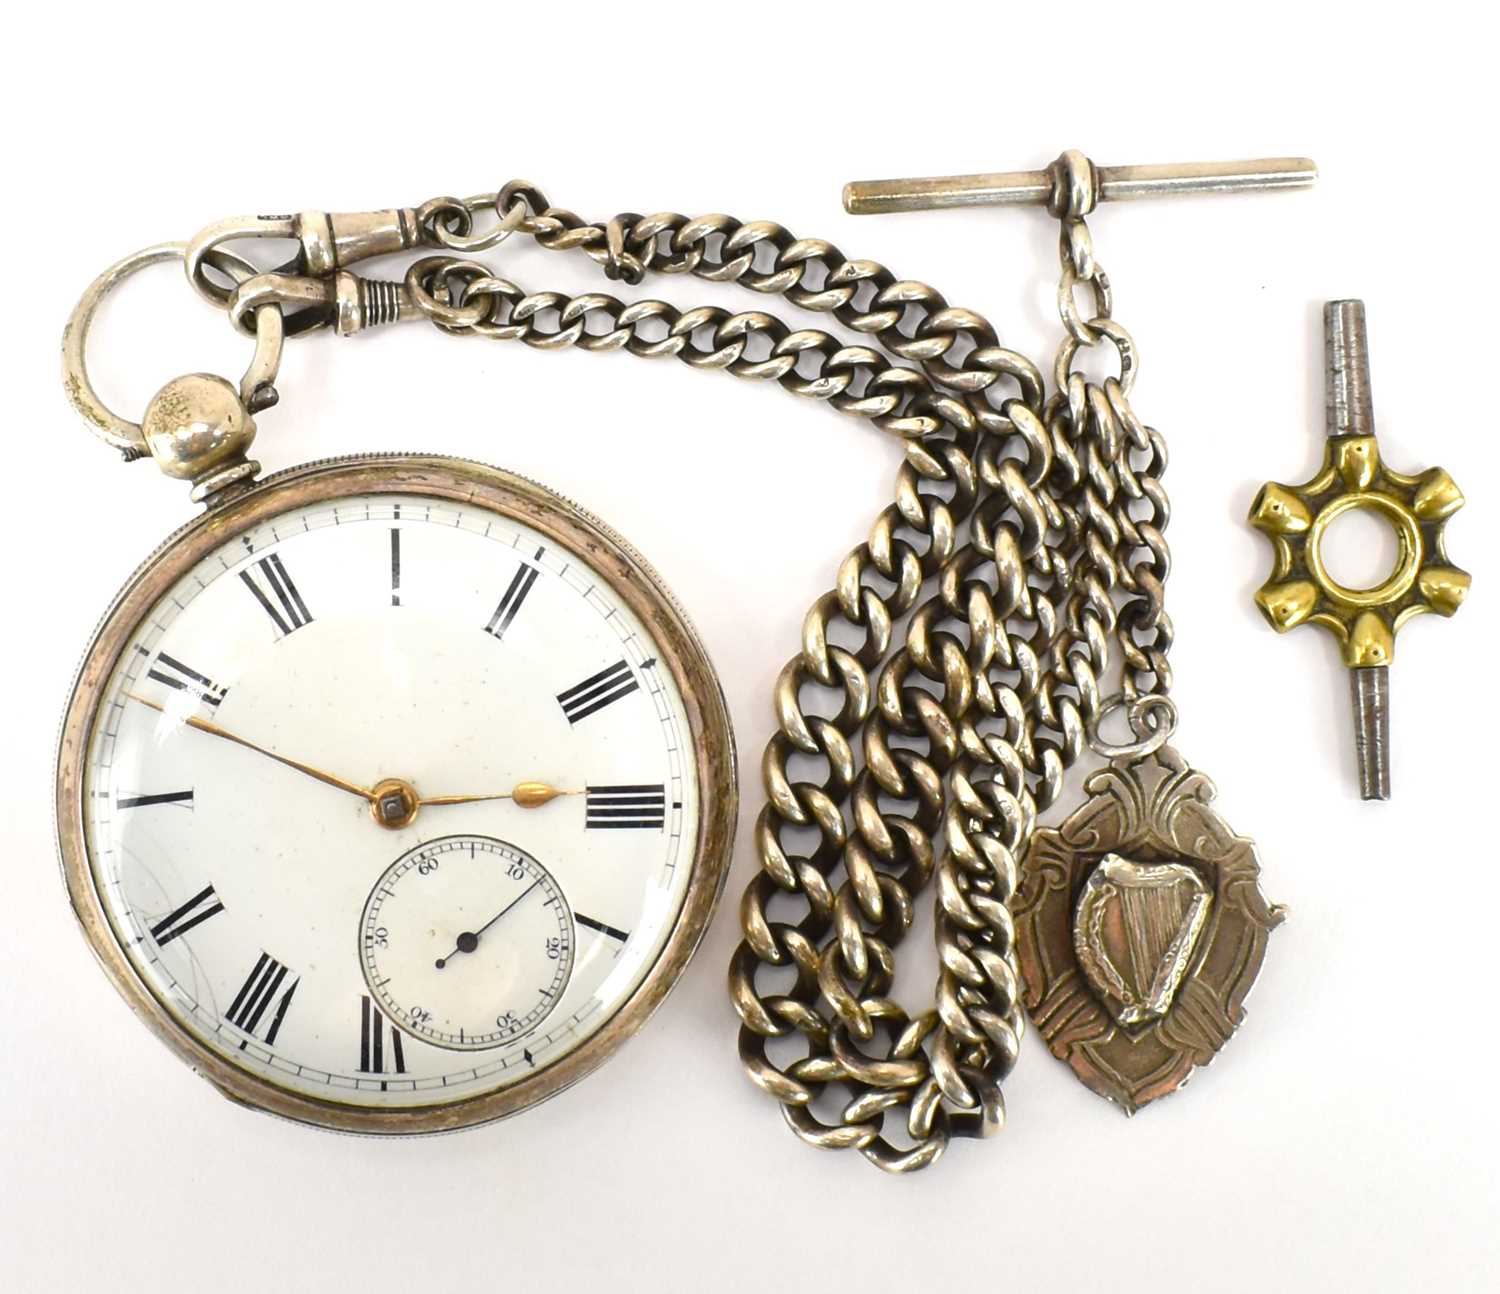 P. COHEN, LEEDS; a hallmarked silver open face pocket watch, the white enamelled dial set with Roman